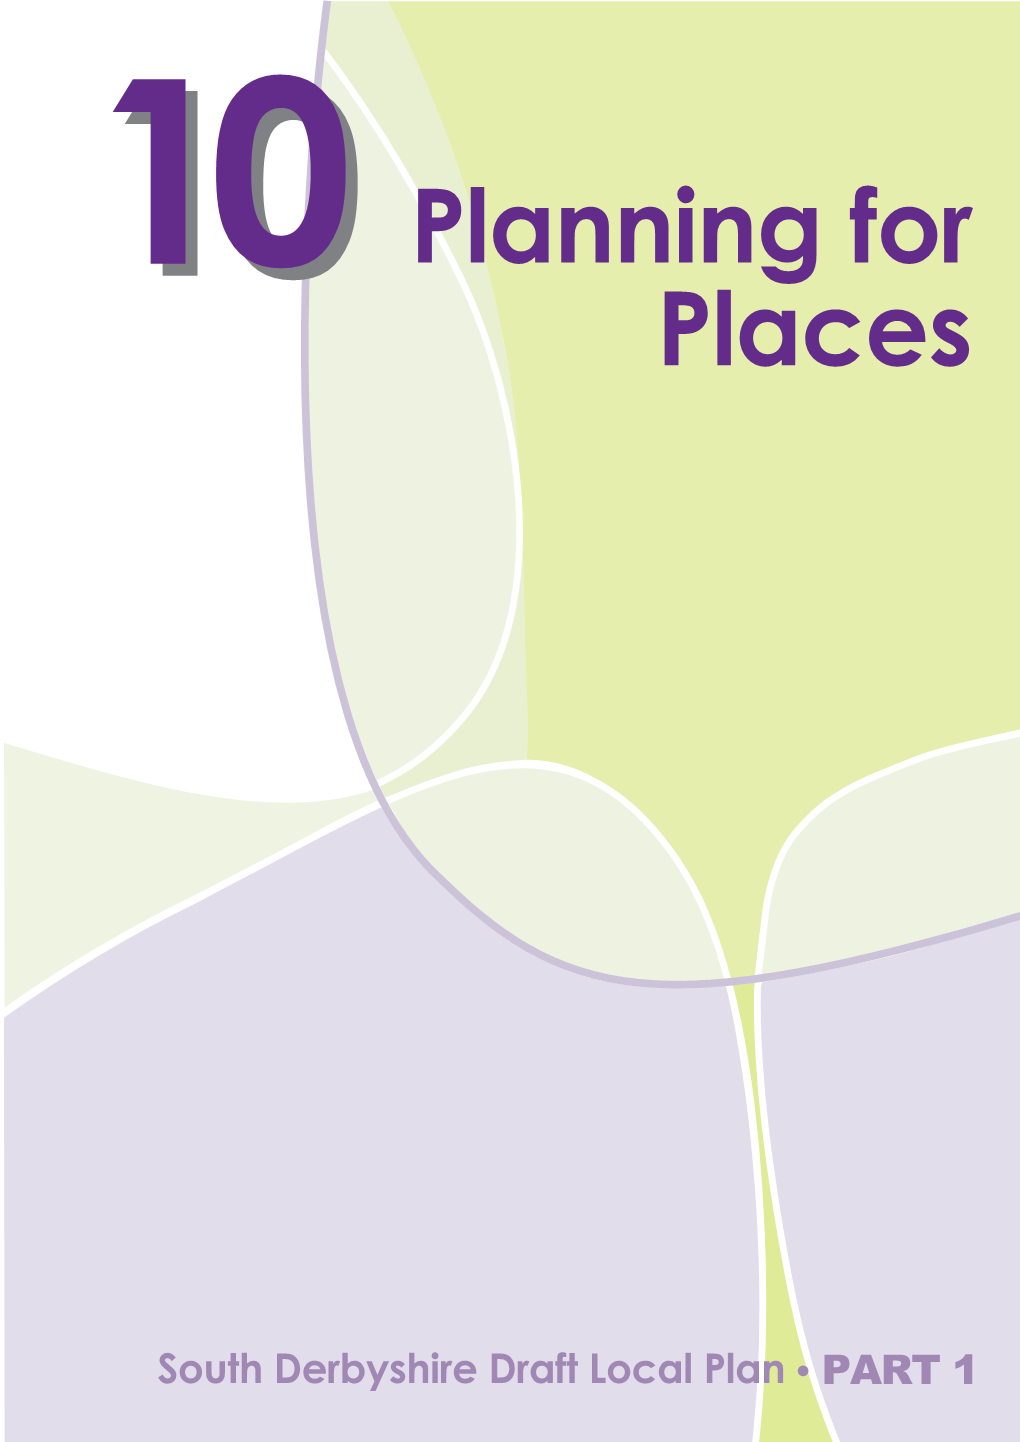 Planning for Places Intro Text